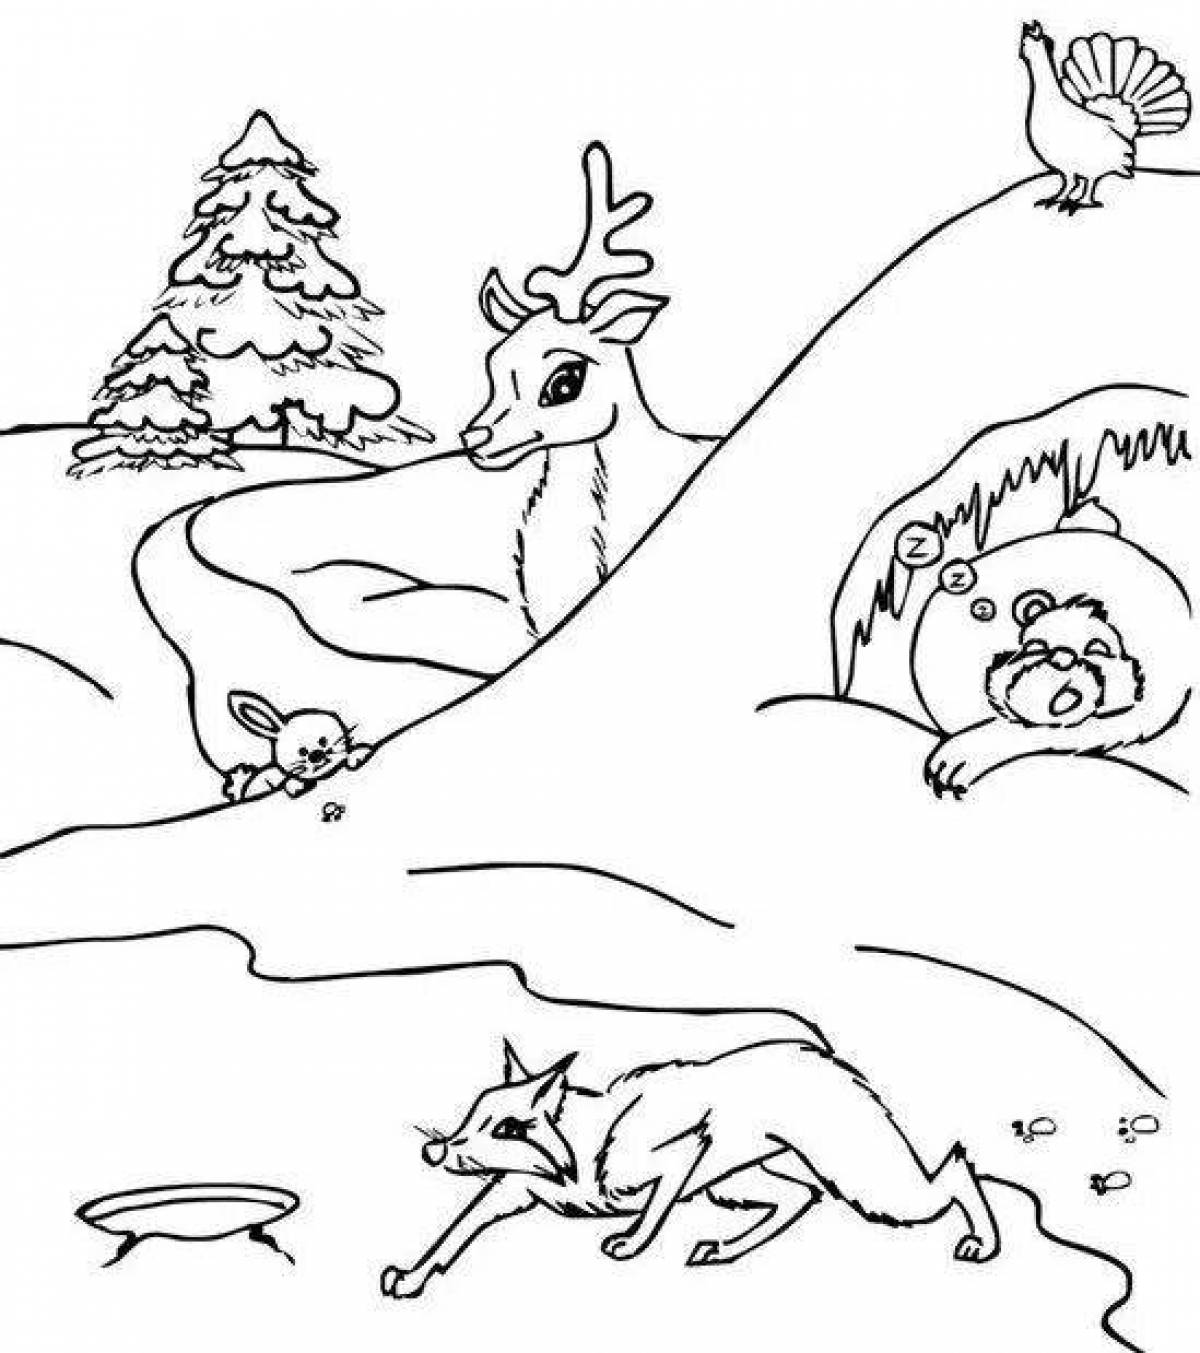 Sparkling coloring pages animals in the forest in winter